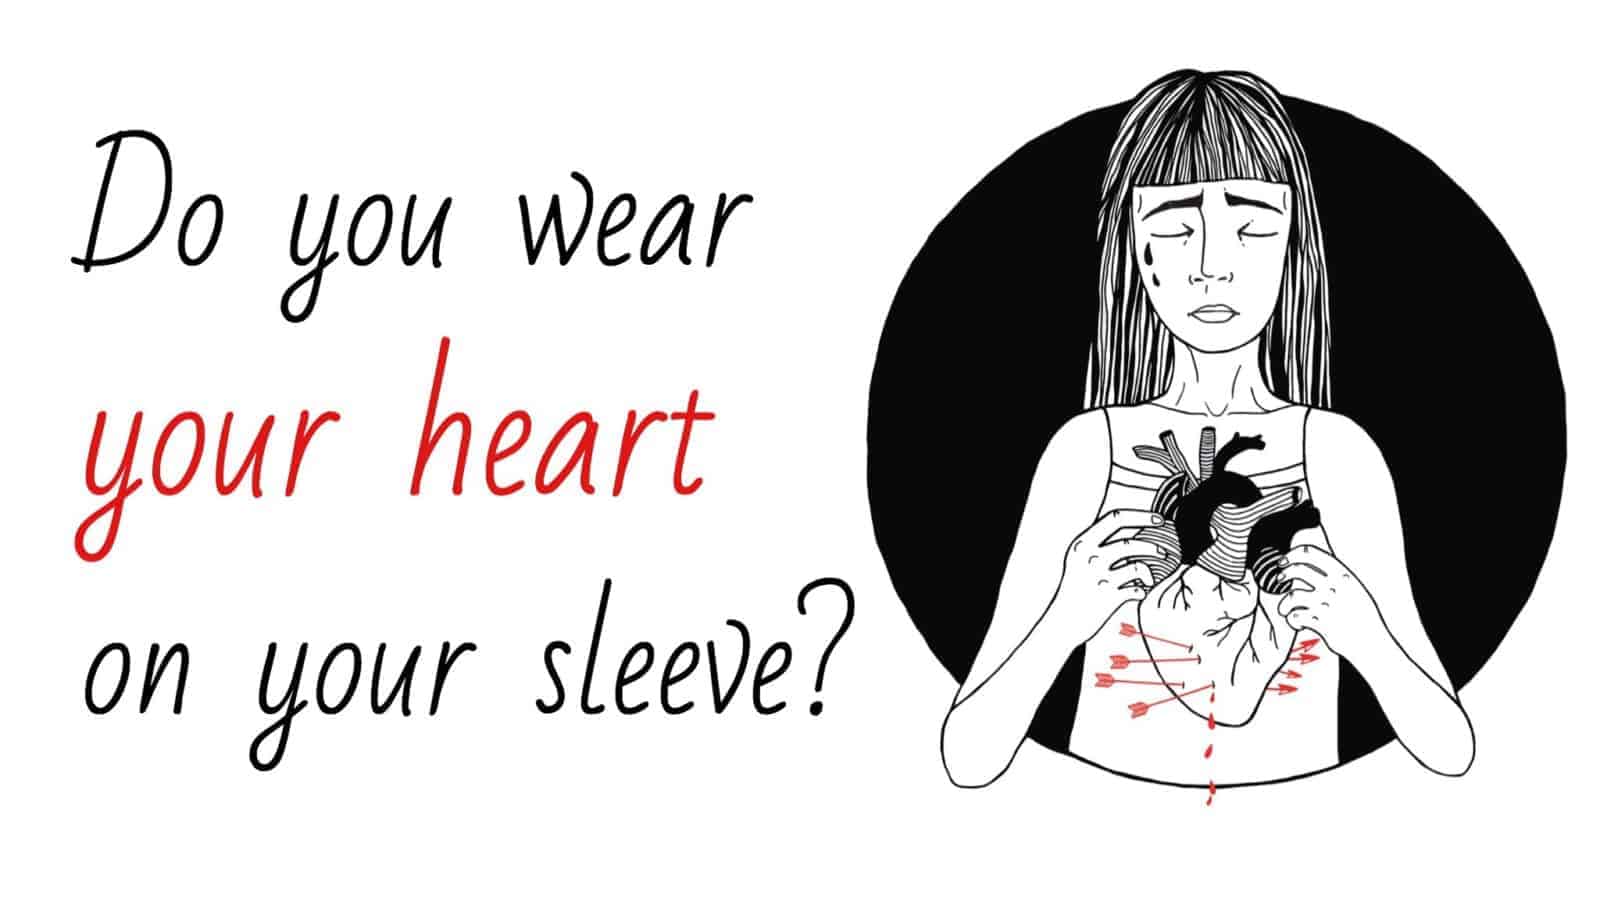 Do You “Wear Your Heart On Your Sleeve”? Here’s 15 Things We All Struggle With